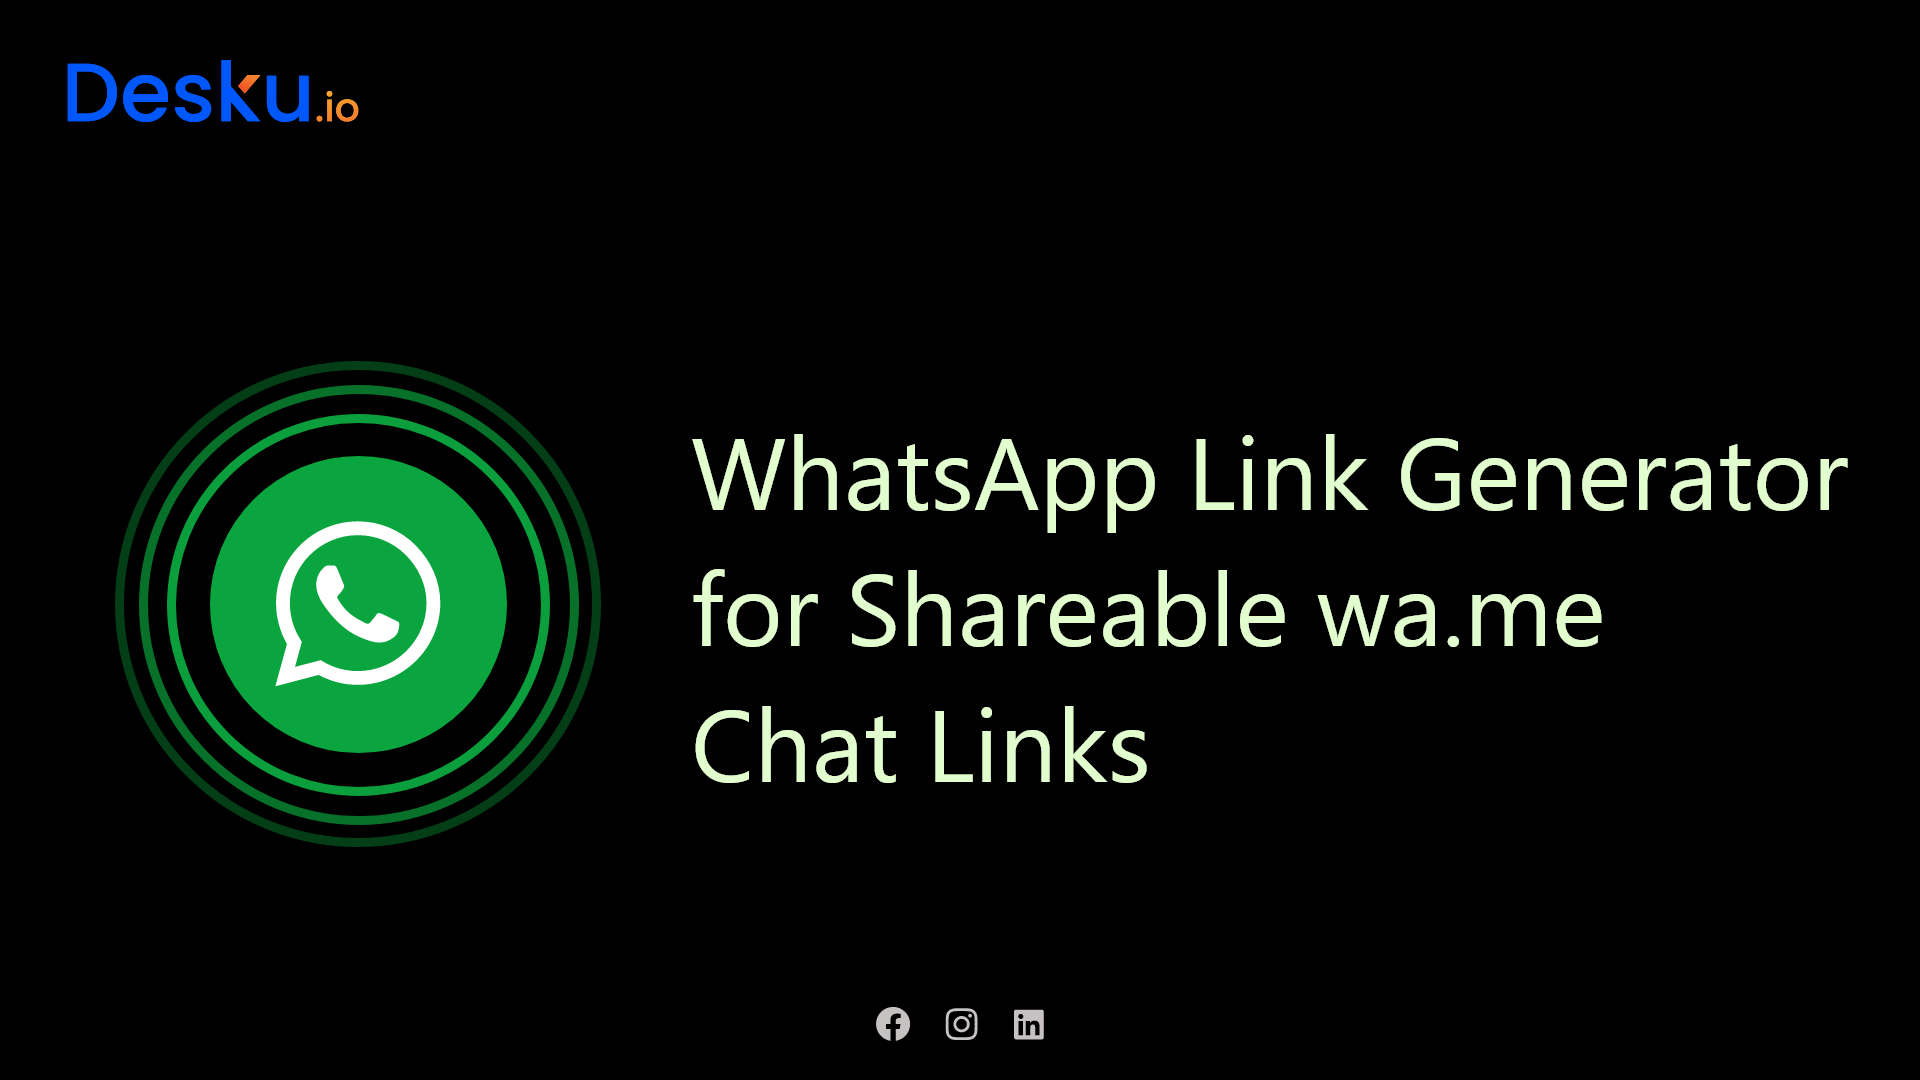 Whatsapp link generator for shareable wa. Me chat links